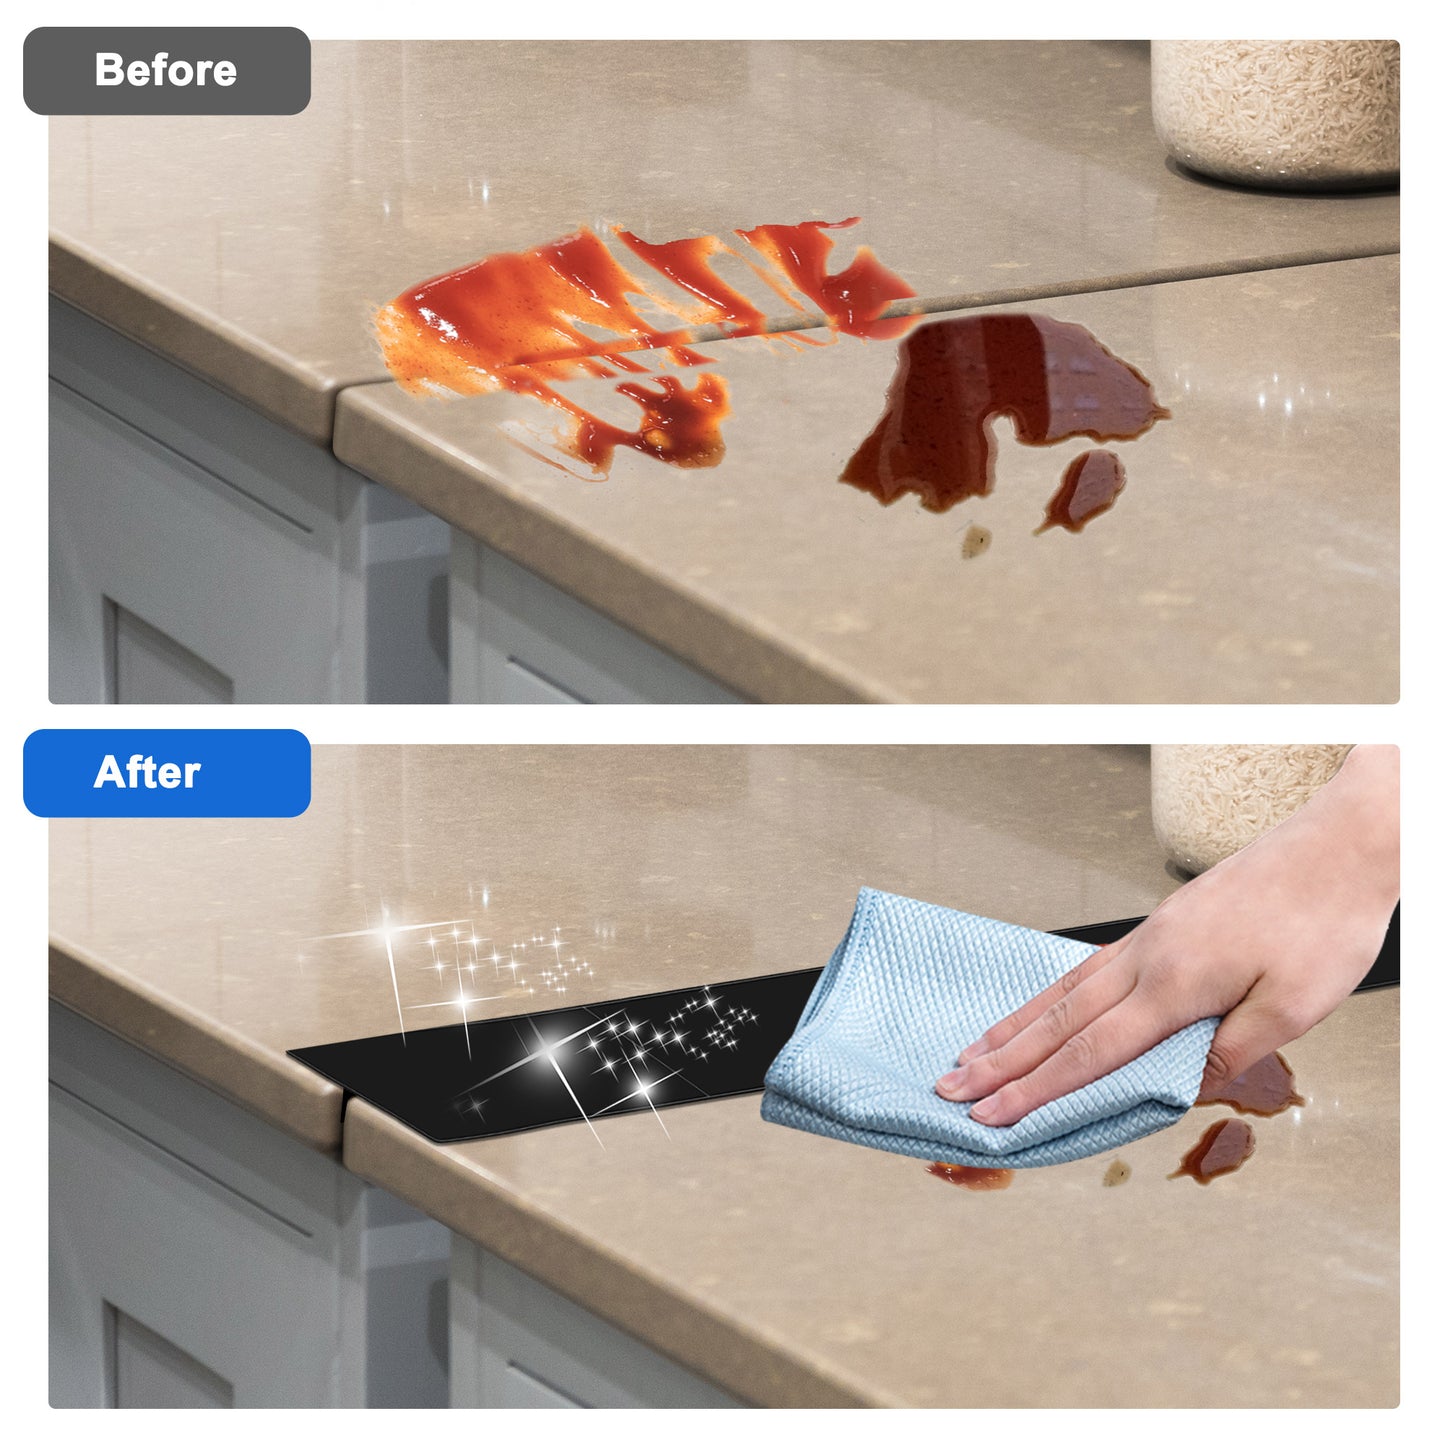 2 Pcs Silicone Stove Gap Covers - 21” Protect and Enhance Your Kitchen with Heat Resistant Edge Guards and Gap Fillers (black)